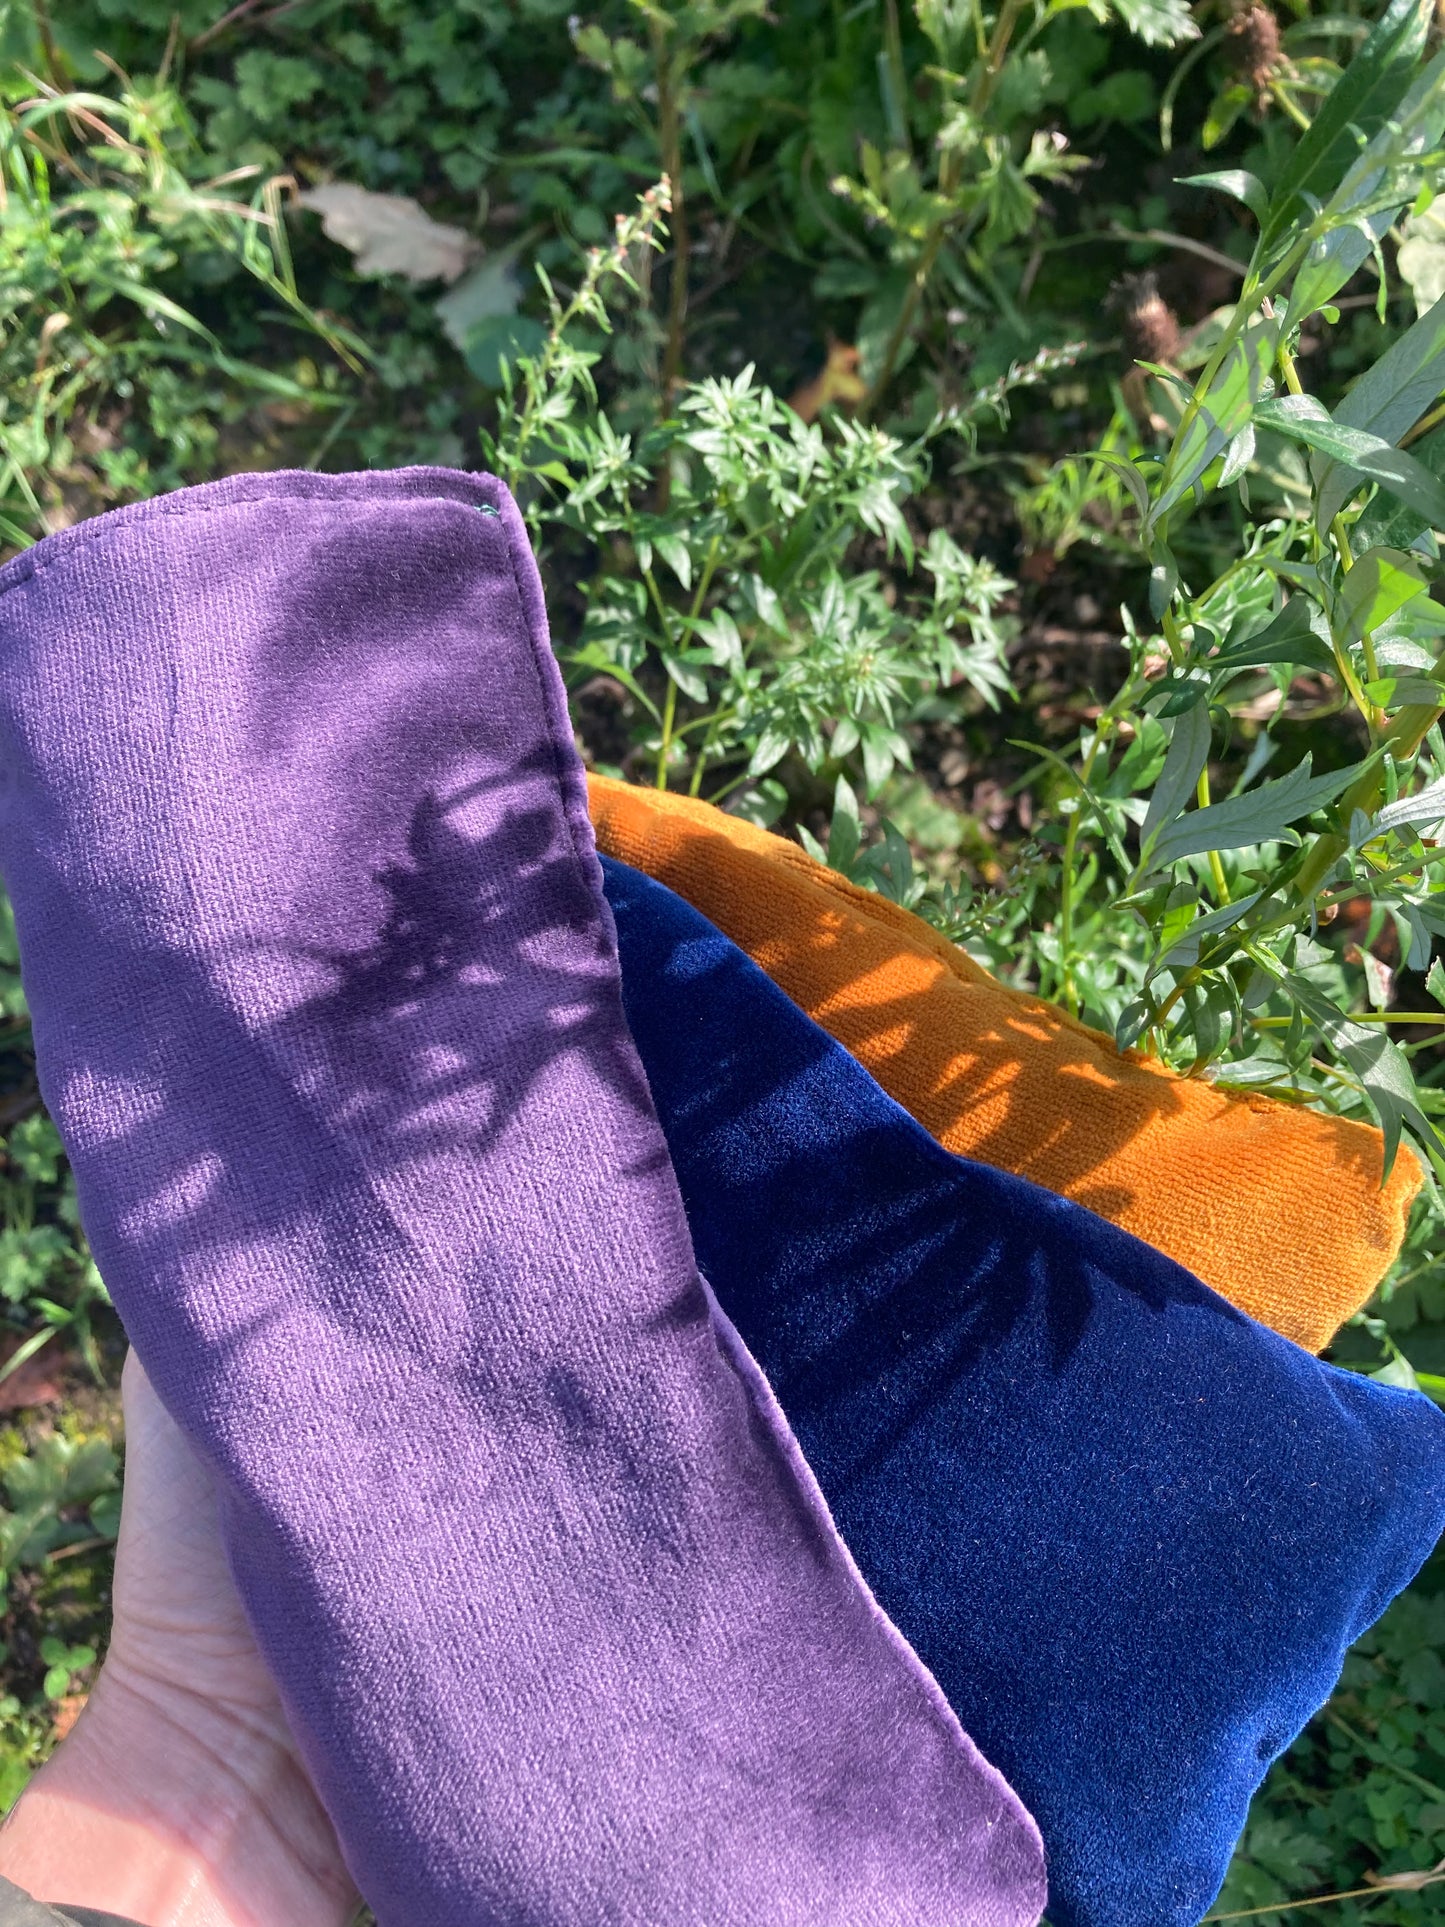 Herbal dream pillow with lavender mugwort and hops